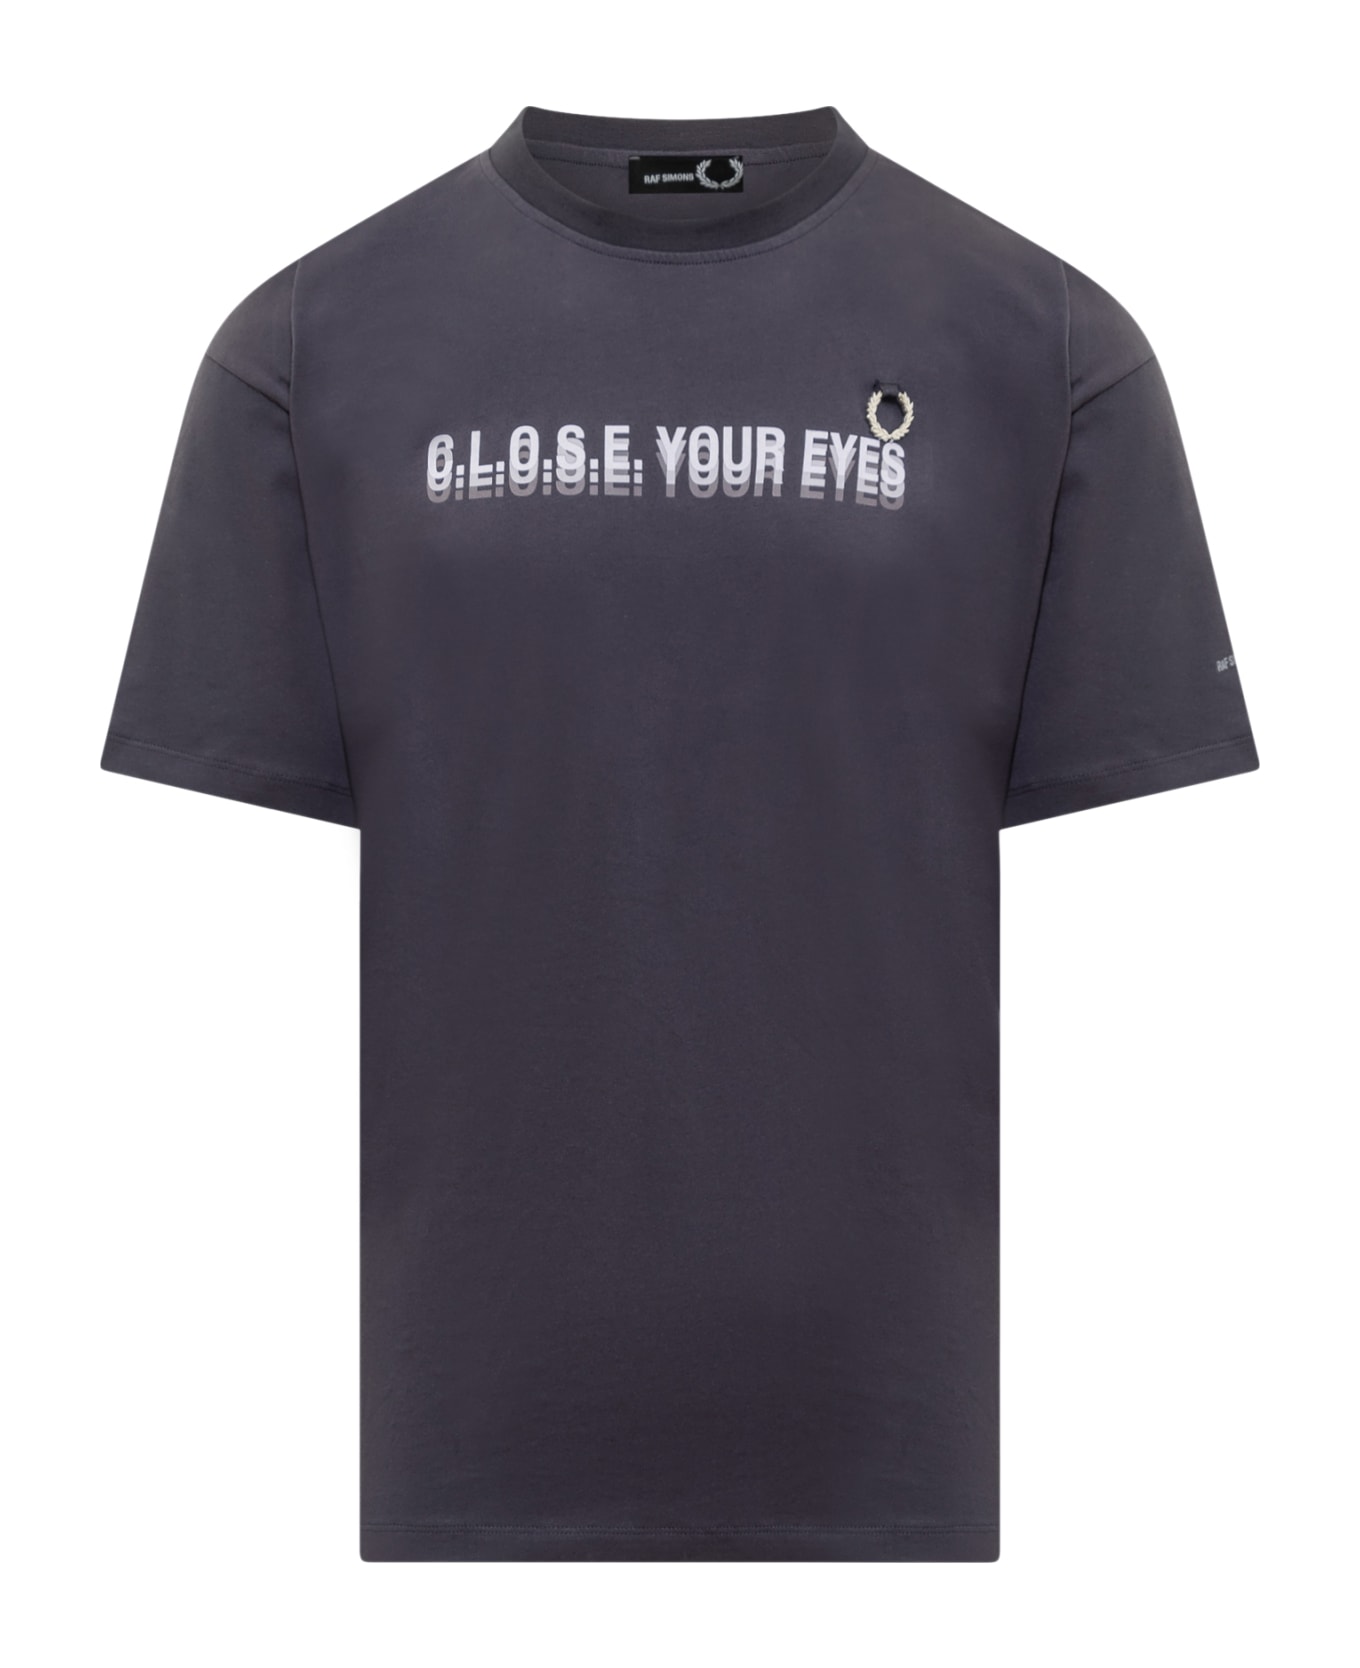 Fred Perry by Raf Simons Fred Perry X Raf Simons T-shirt With Print - NAVY BLUE シャツ